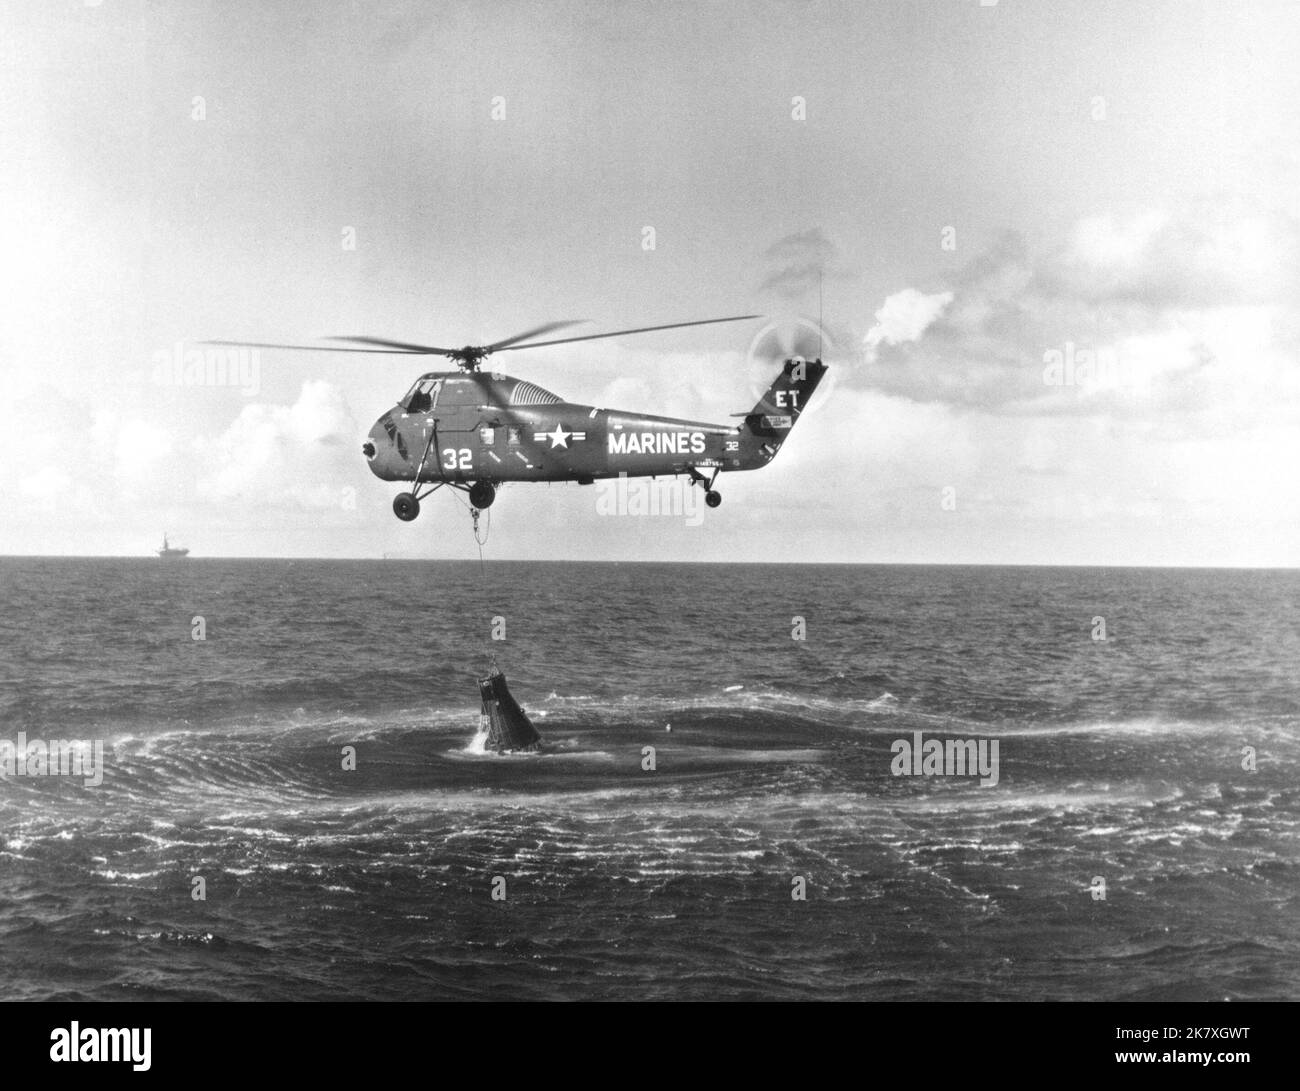 HUS-1 helicopter attempting to recover the Liberty Bell 7 spacecraft. The recovery ship USS Randolph is visible in the distance. Stock Photo